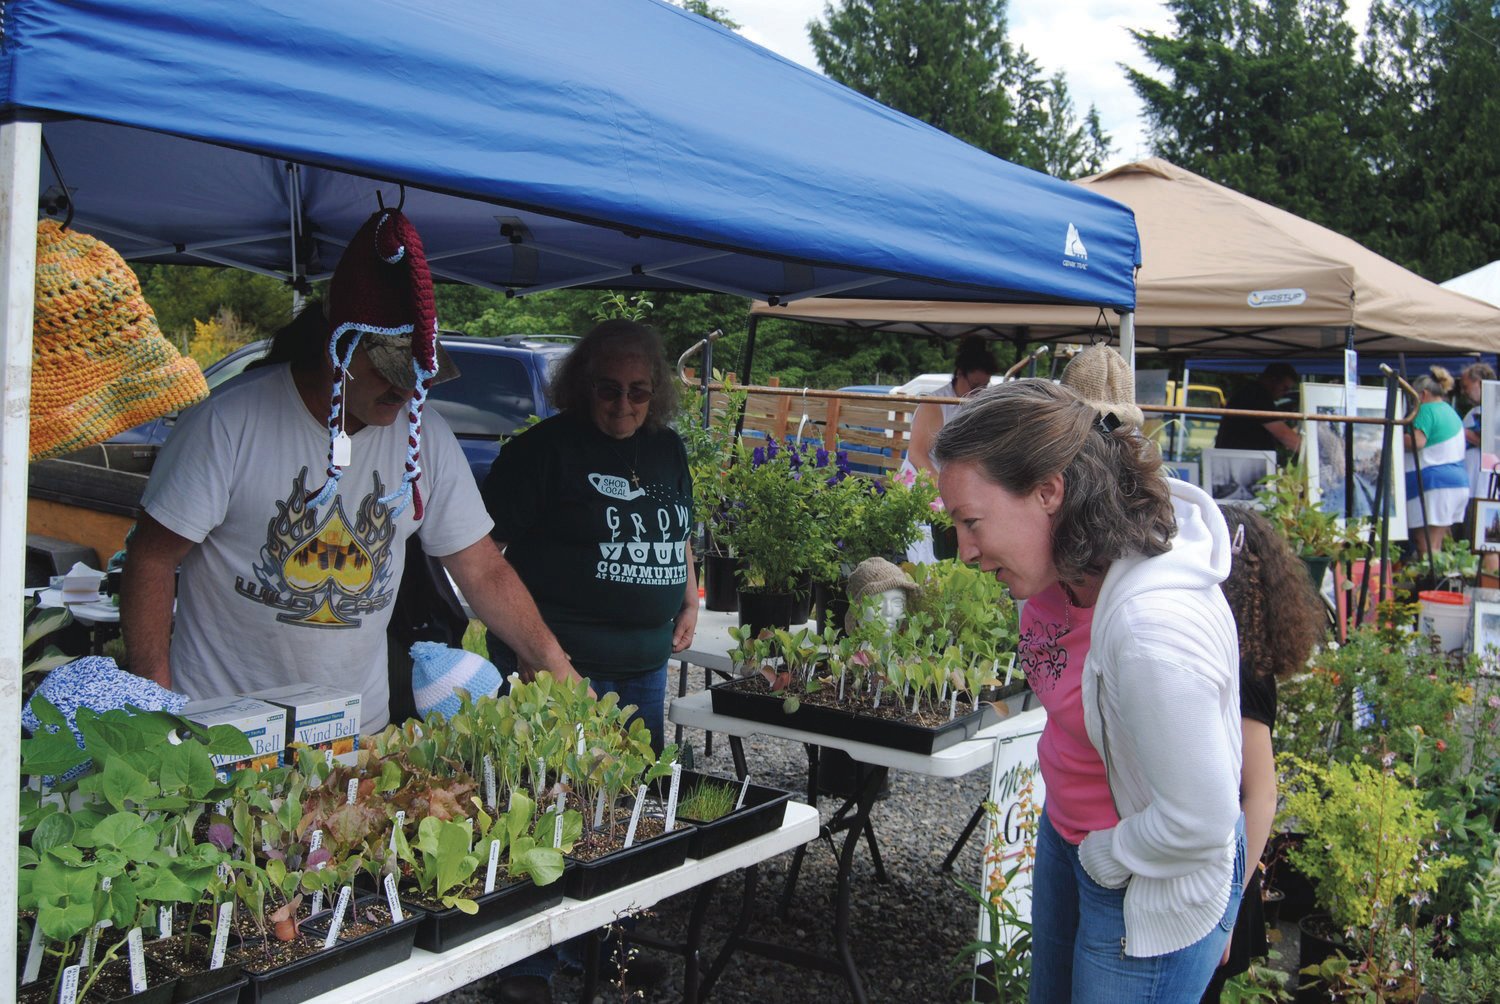 Vendors participate in a previous Yelm Farmers Market. This year, the market will be held on McKenzie Street near the Yelm Police Station.